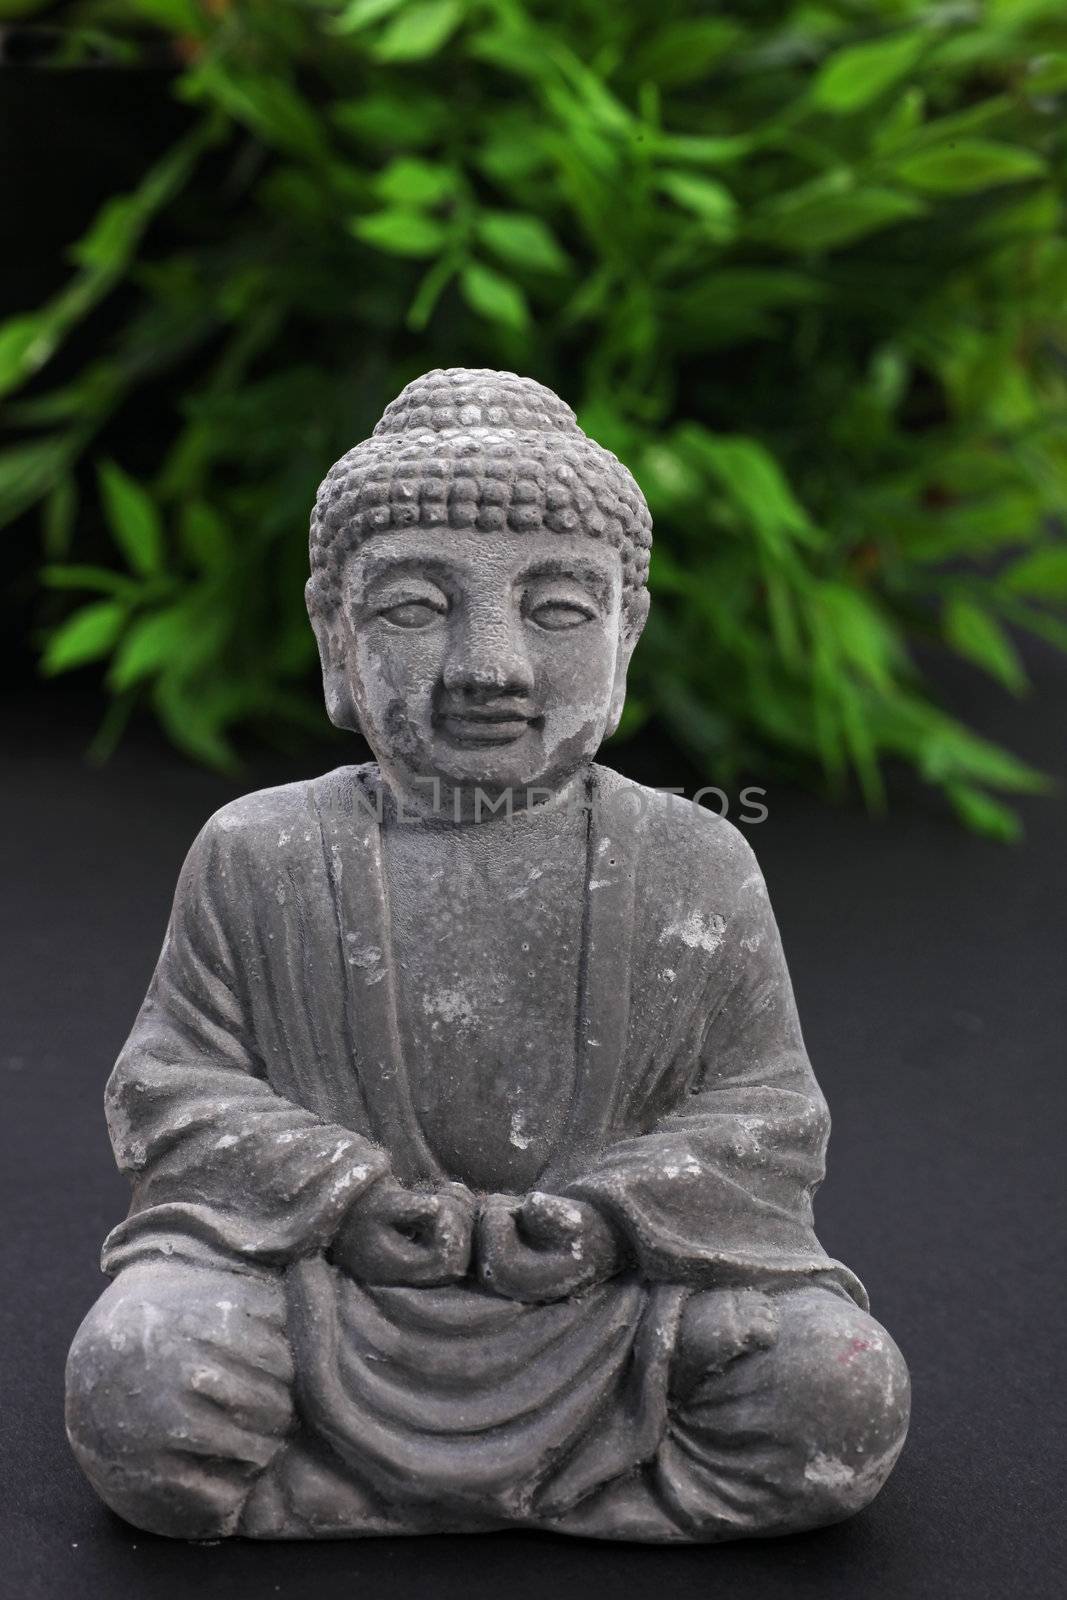 Carved Asian stone meditating Buddha statue sitting in the lotus position with lush greenery and leaves behind